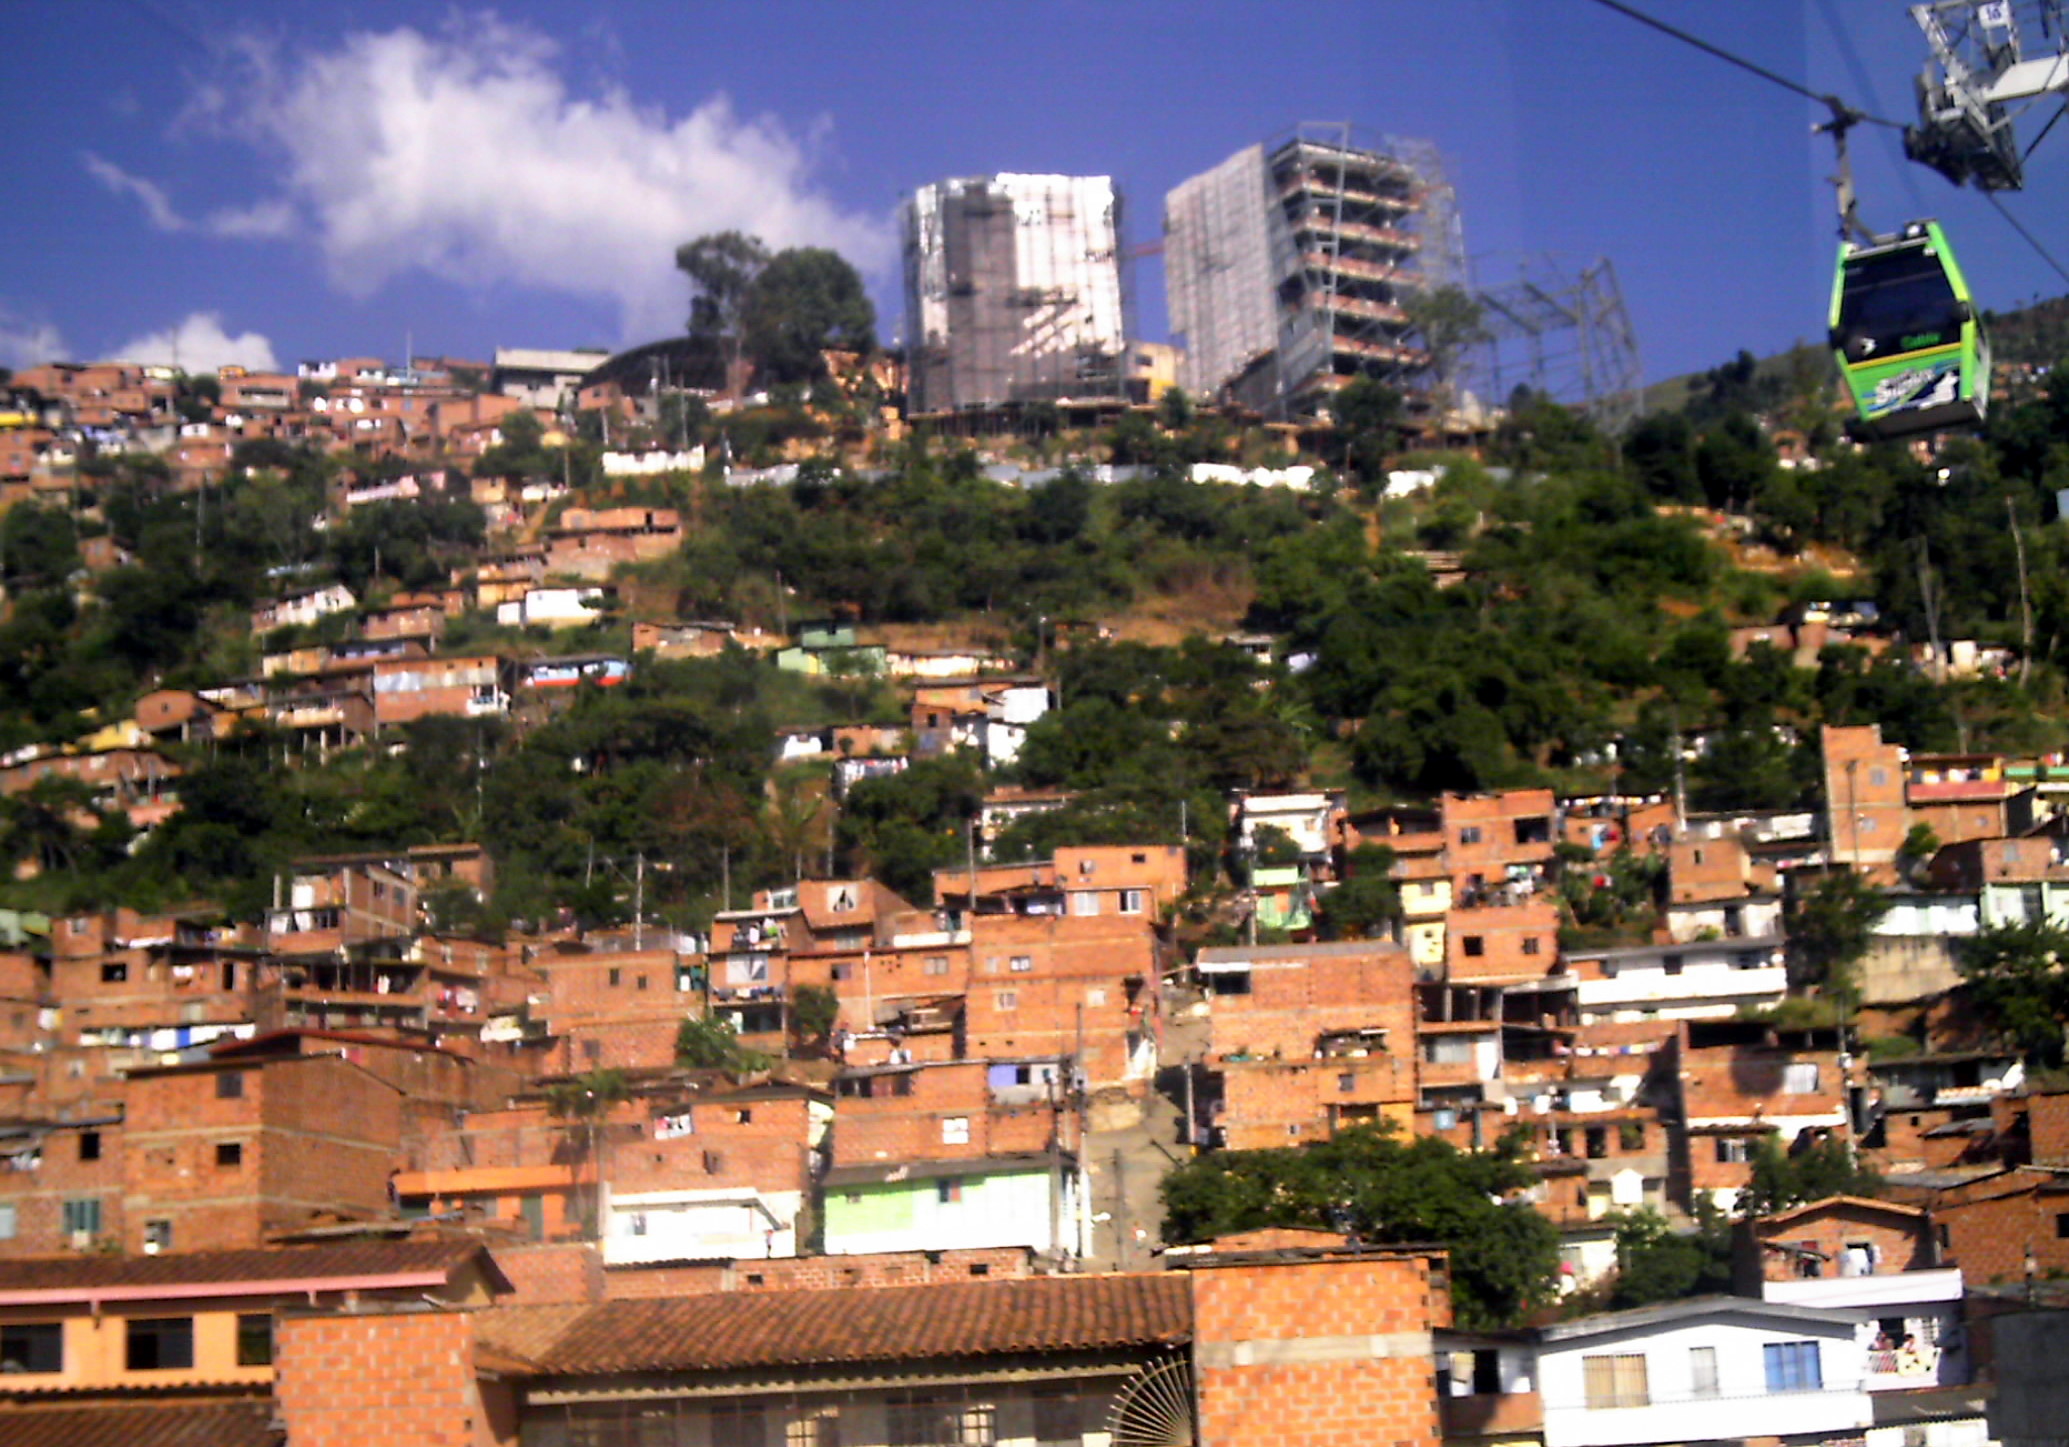 an image of the city on the top of a hill